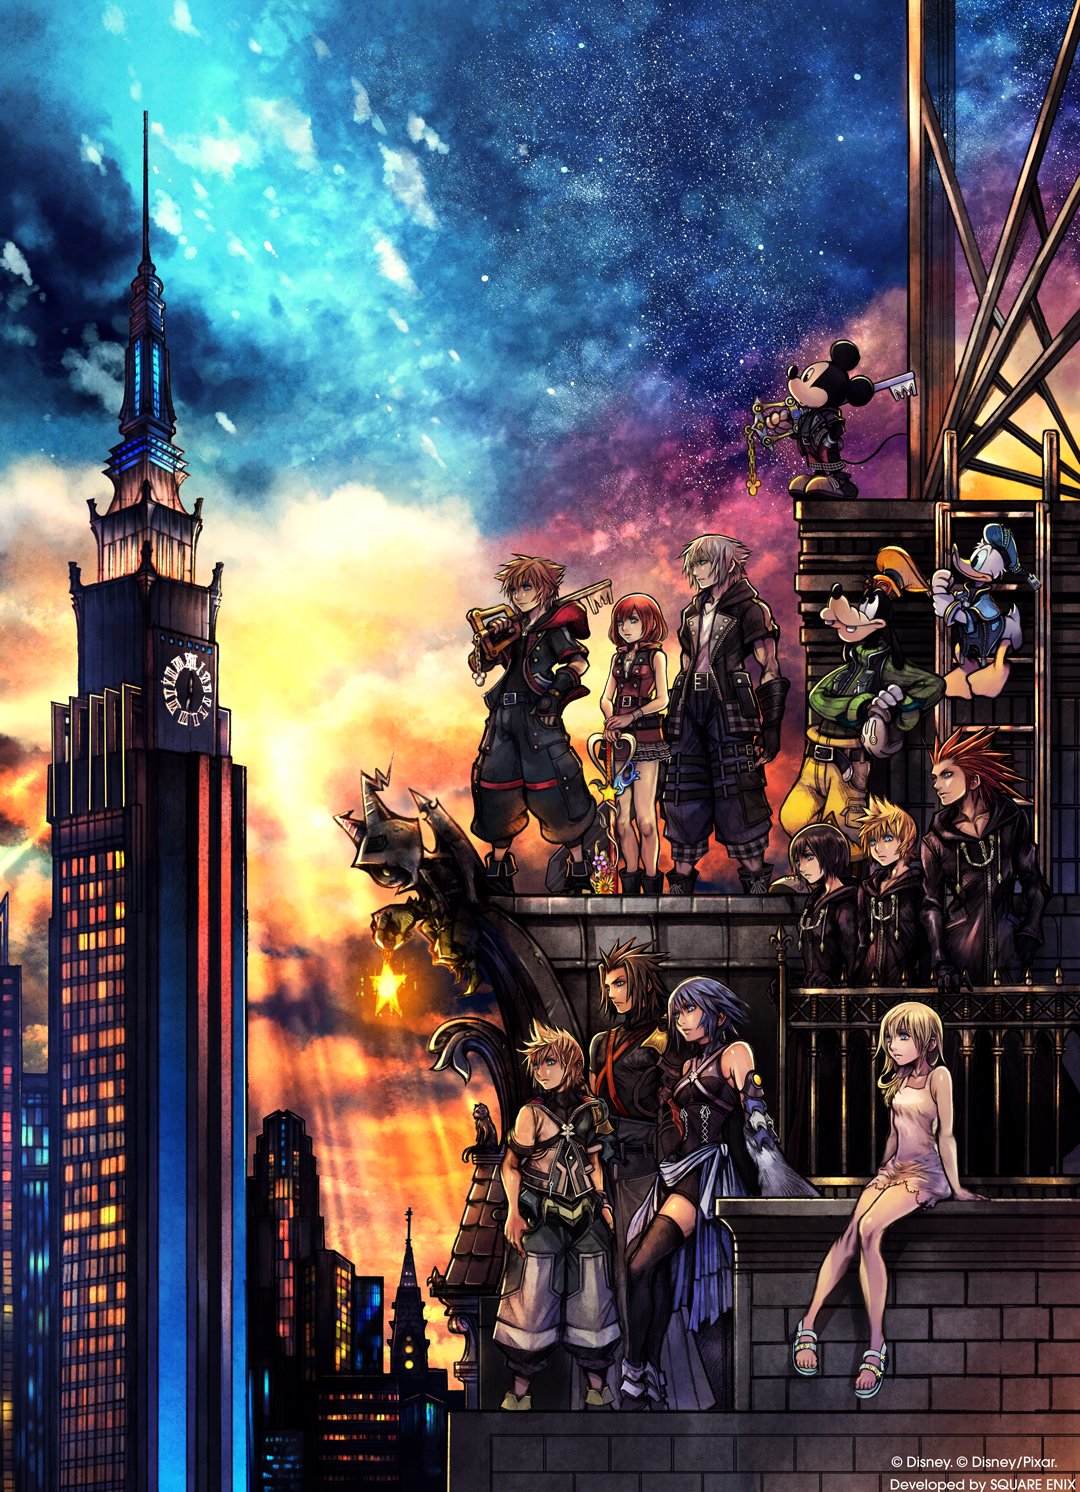 The Kingdom Hearts 3 official box art was just revealed. And it's beautiful.